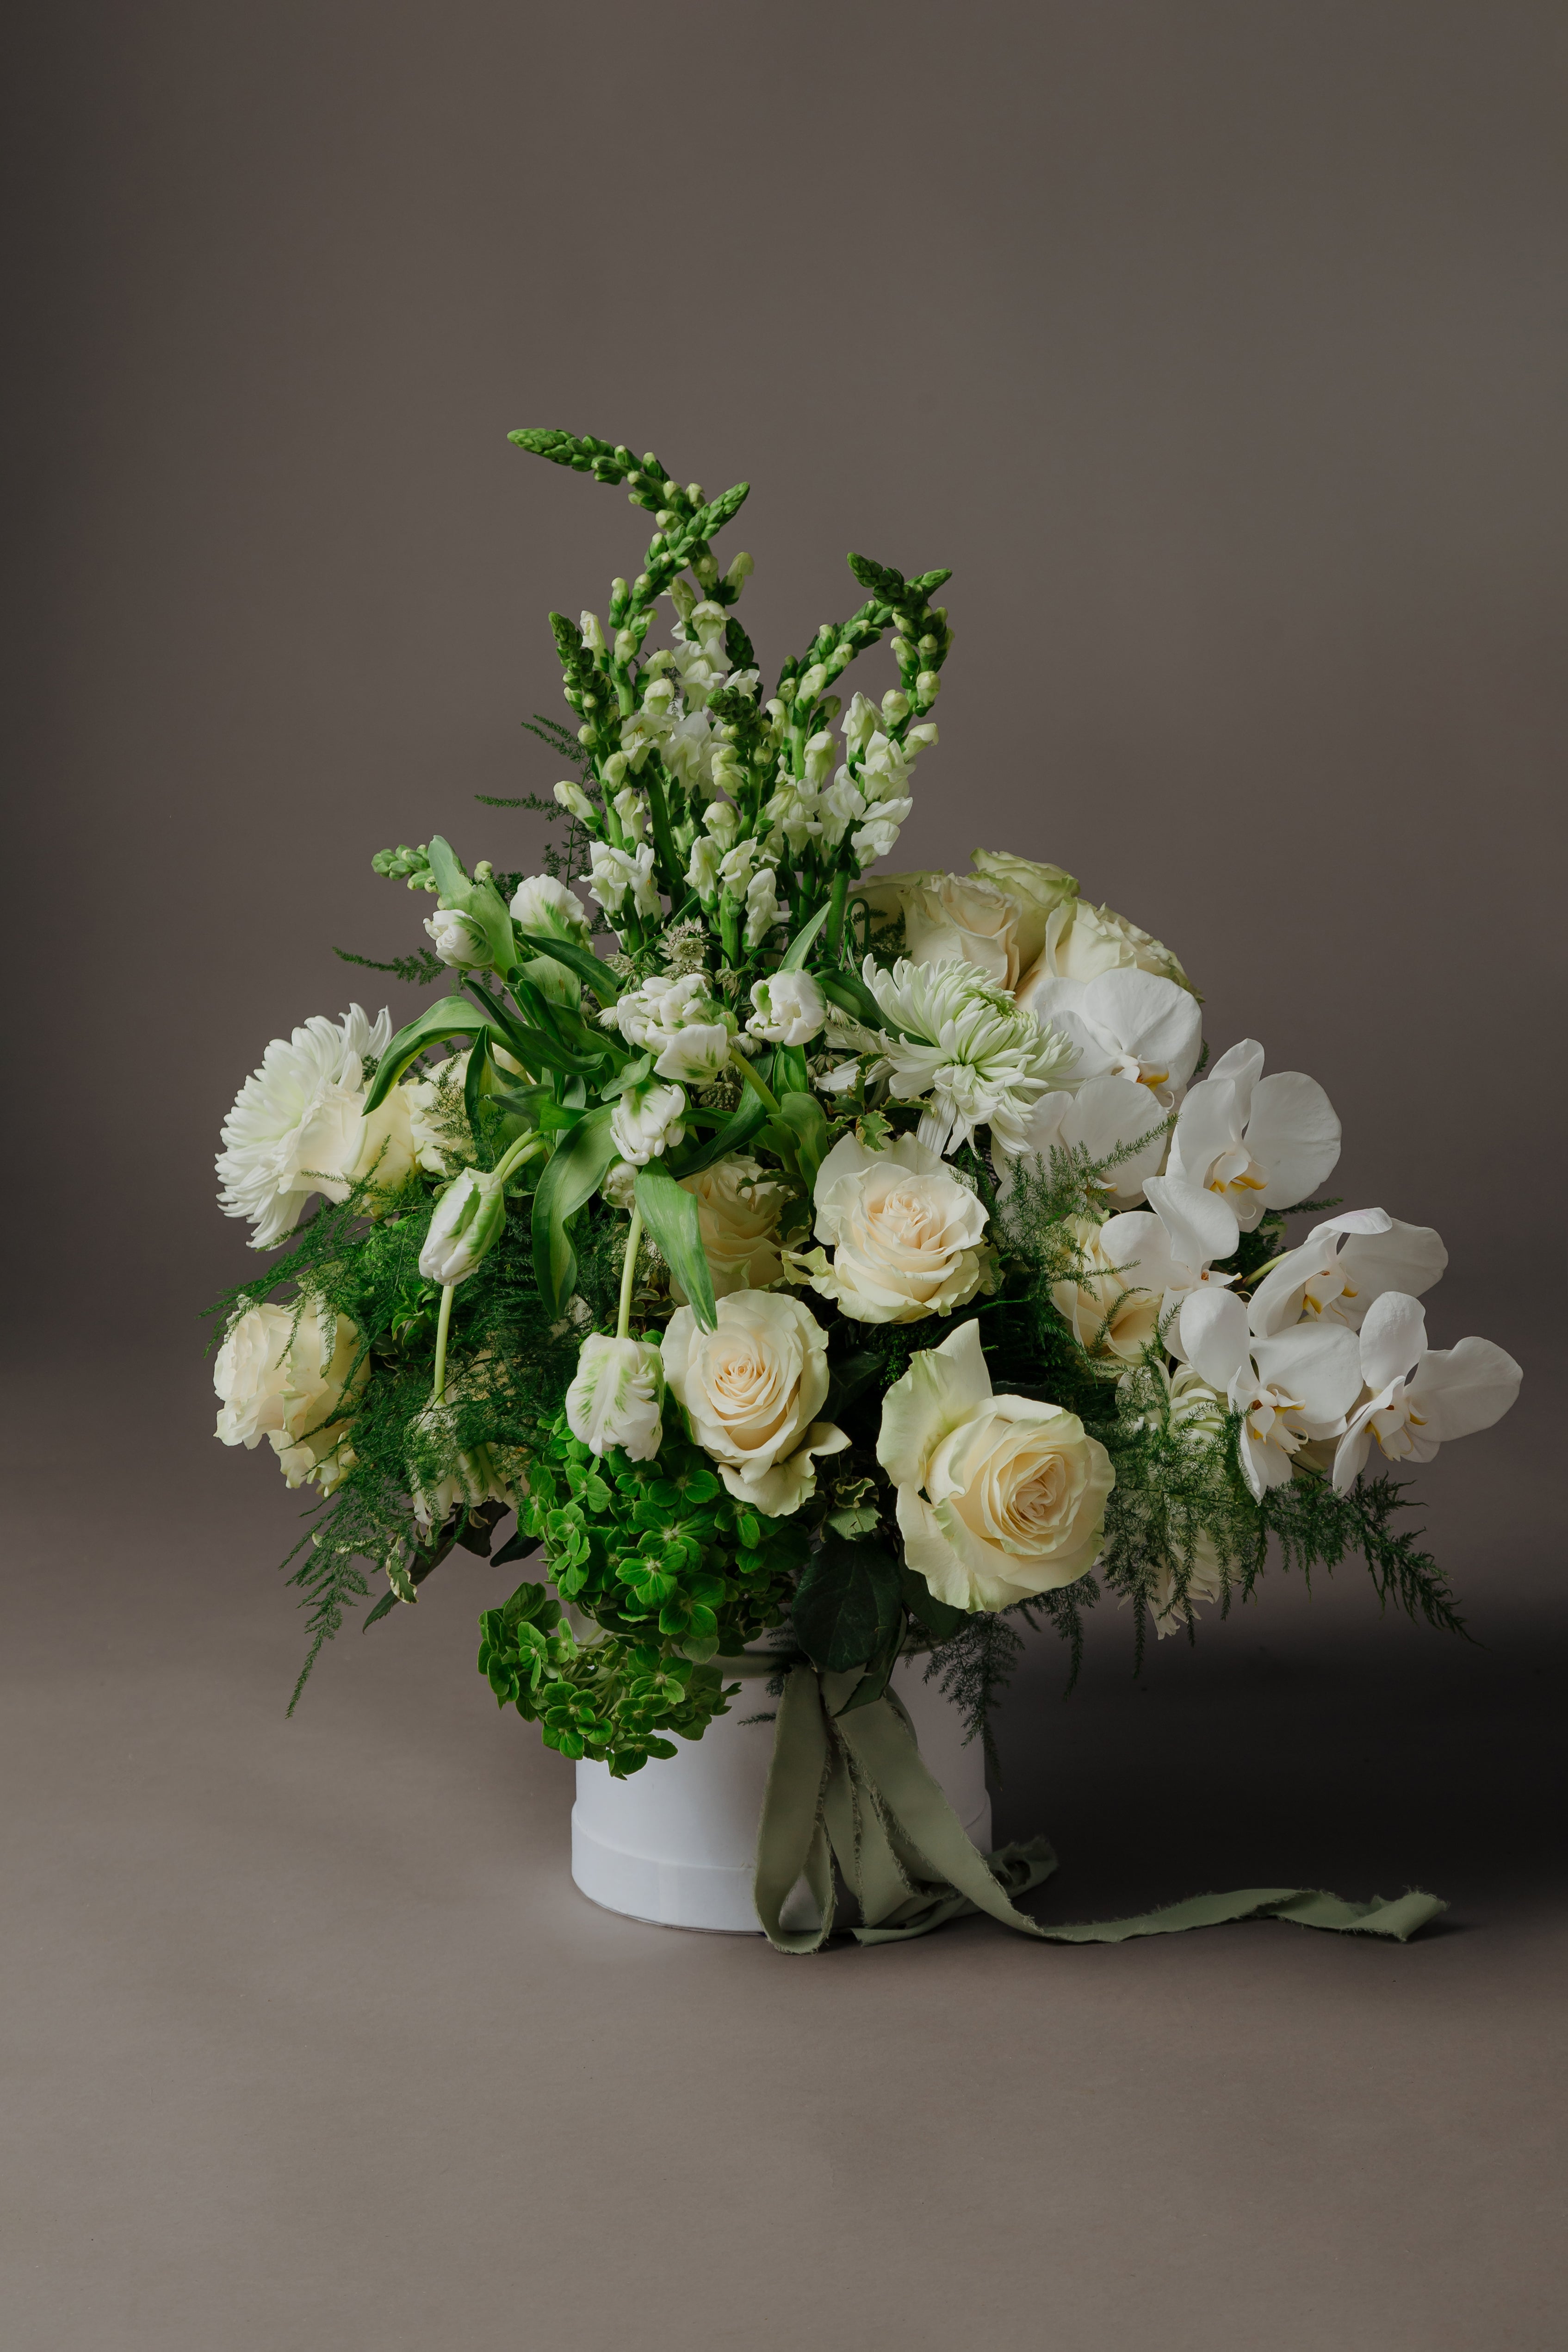 Aesthetic White and Green Flowers Arrangement